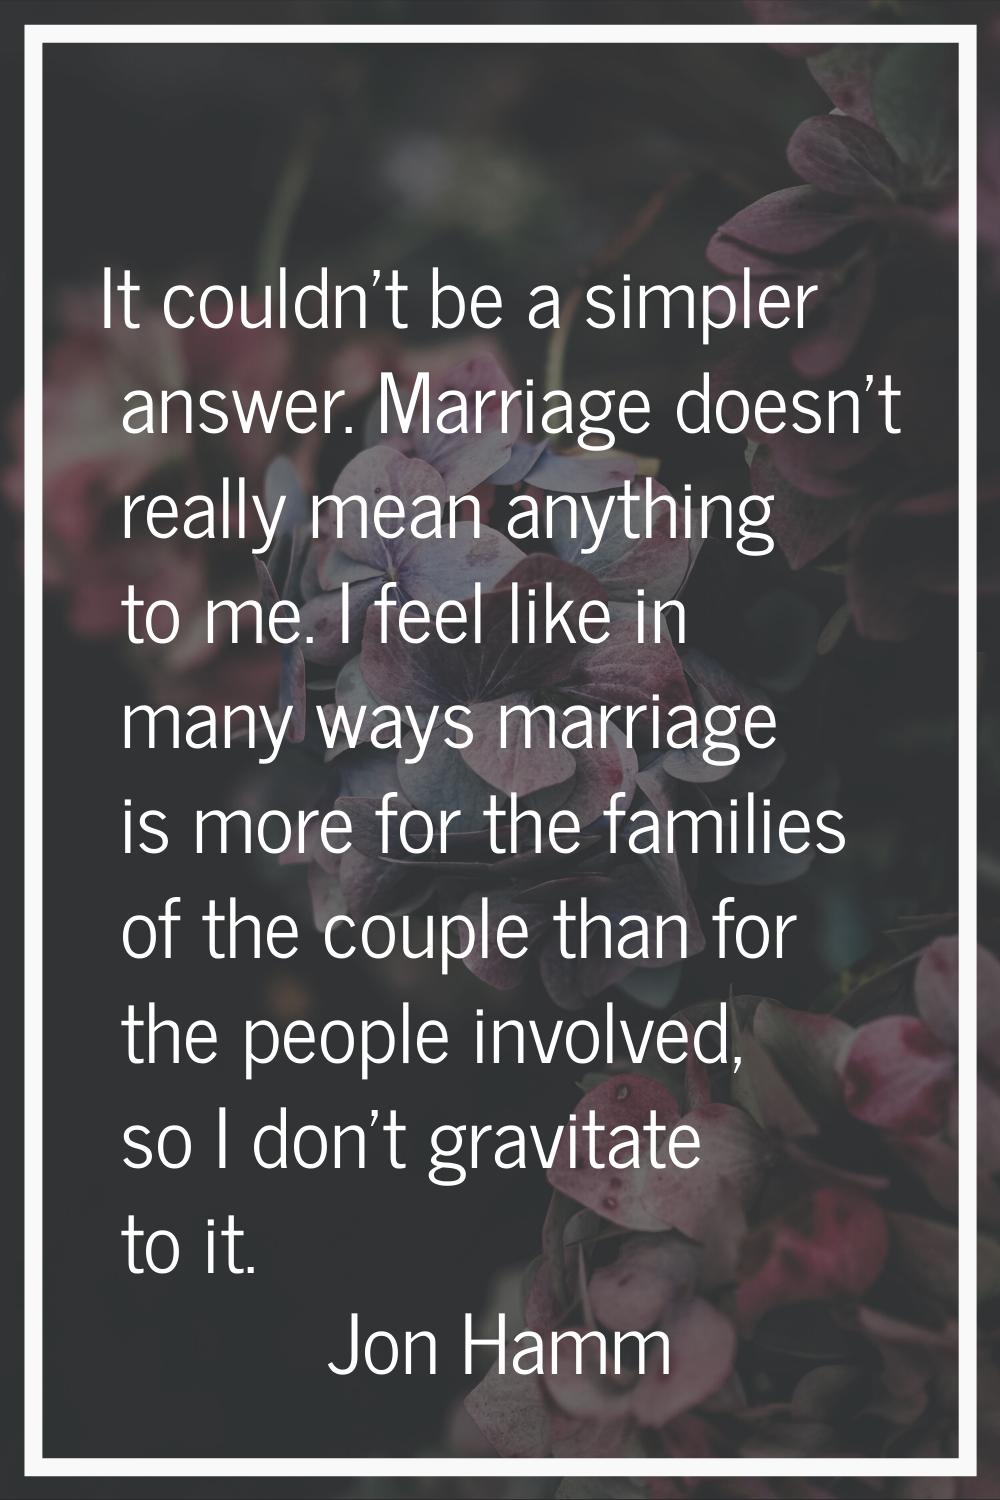 It couldn't be a simpler answer. Marriage doesn't really mean anything to me. I feel like in many w